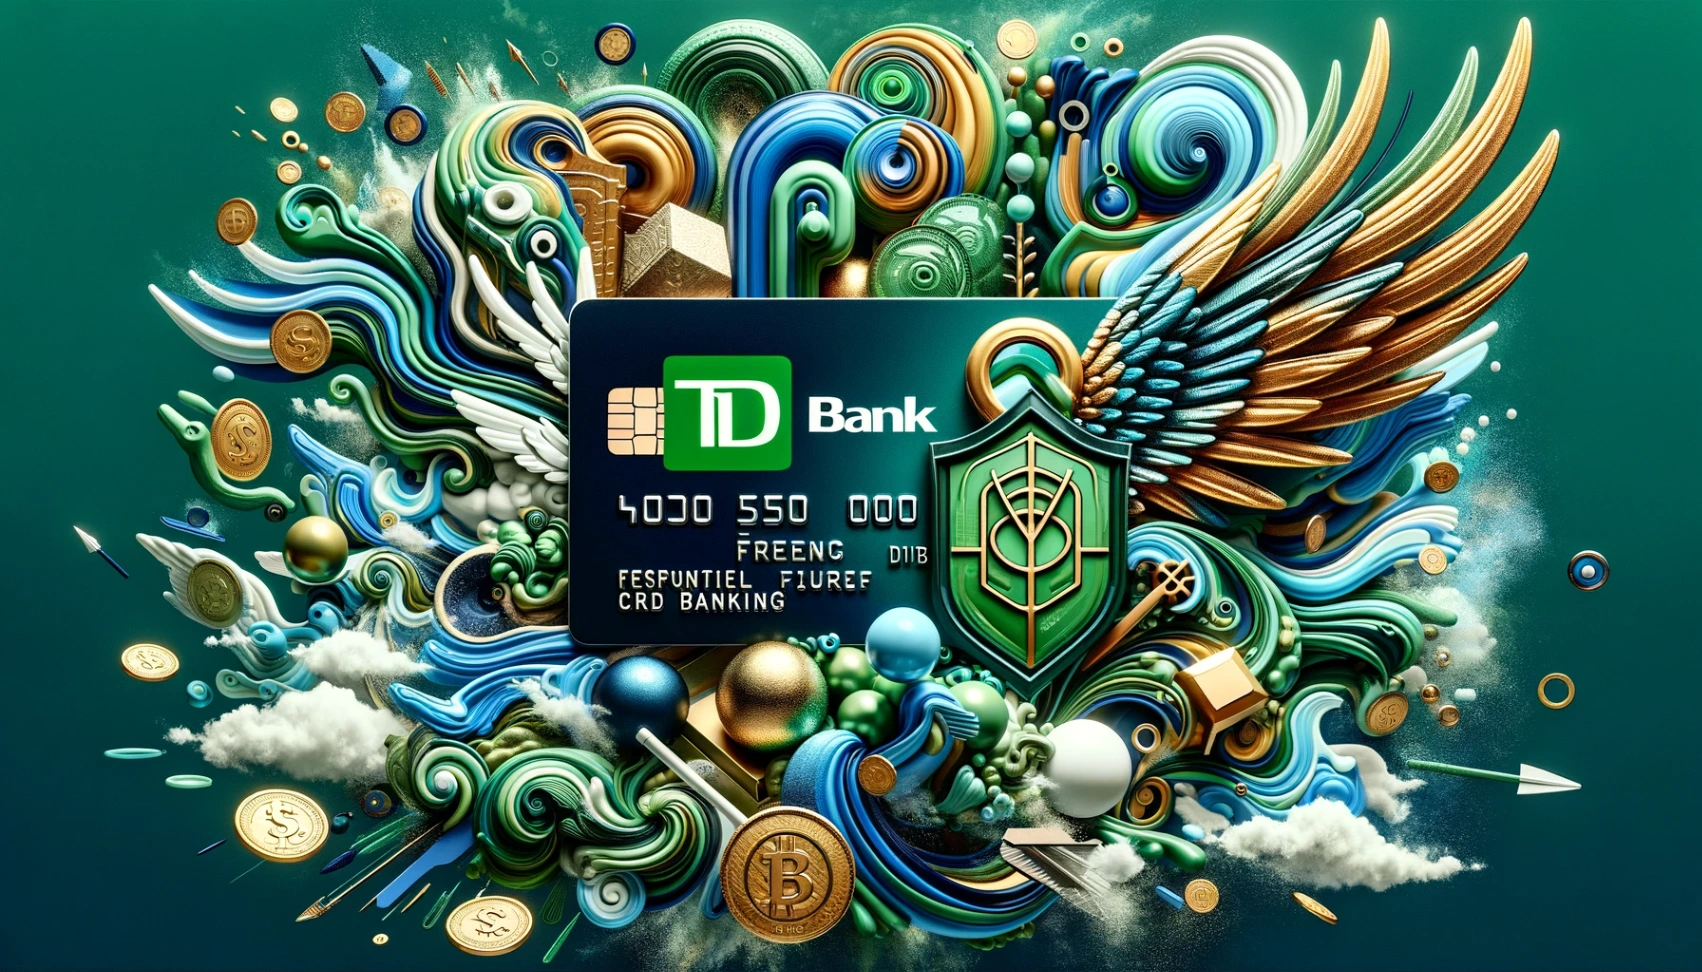 TD Bank Credit Card - Learn How to Apply Online